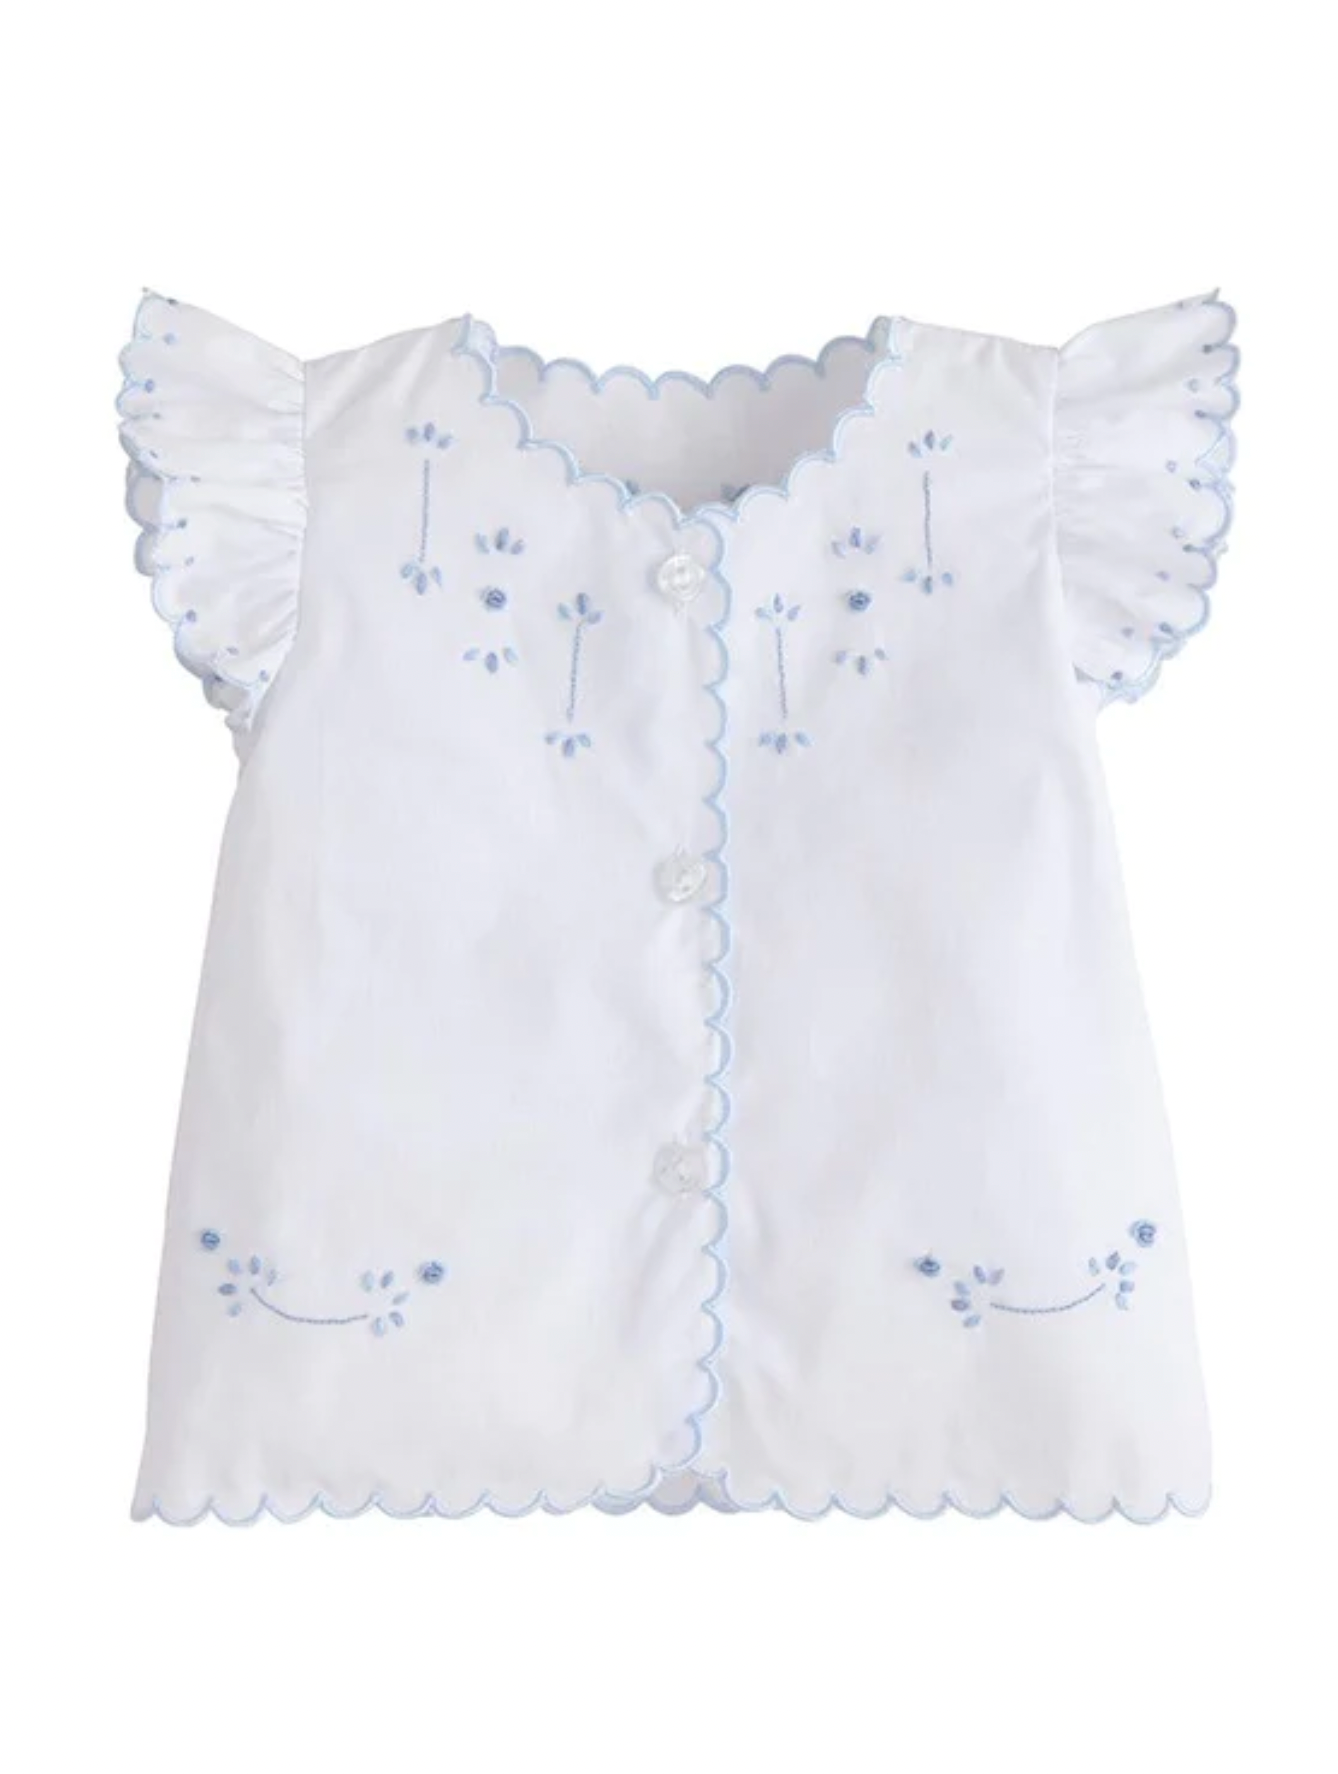 Little English Tea Blouse and Bow Bloomer Set in Blue